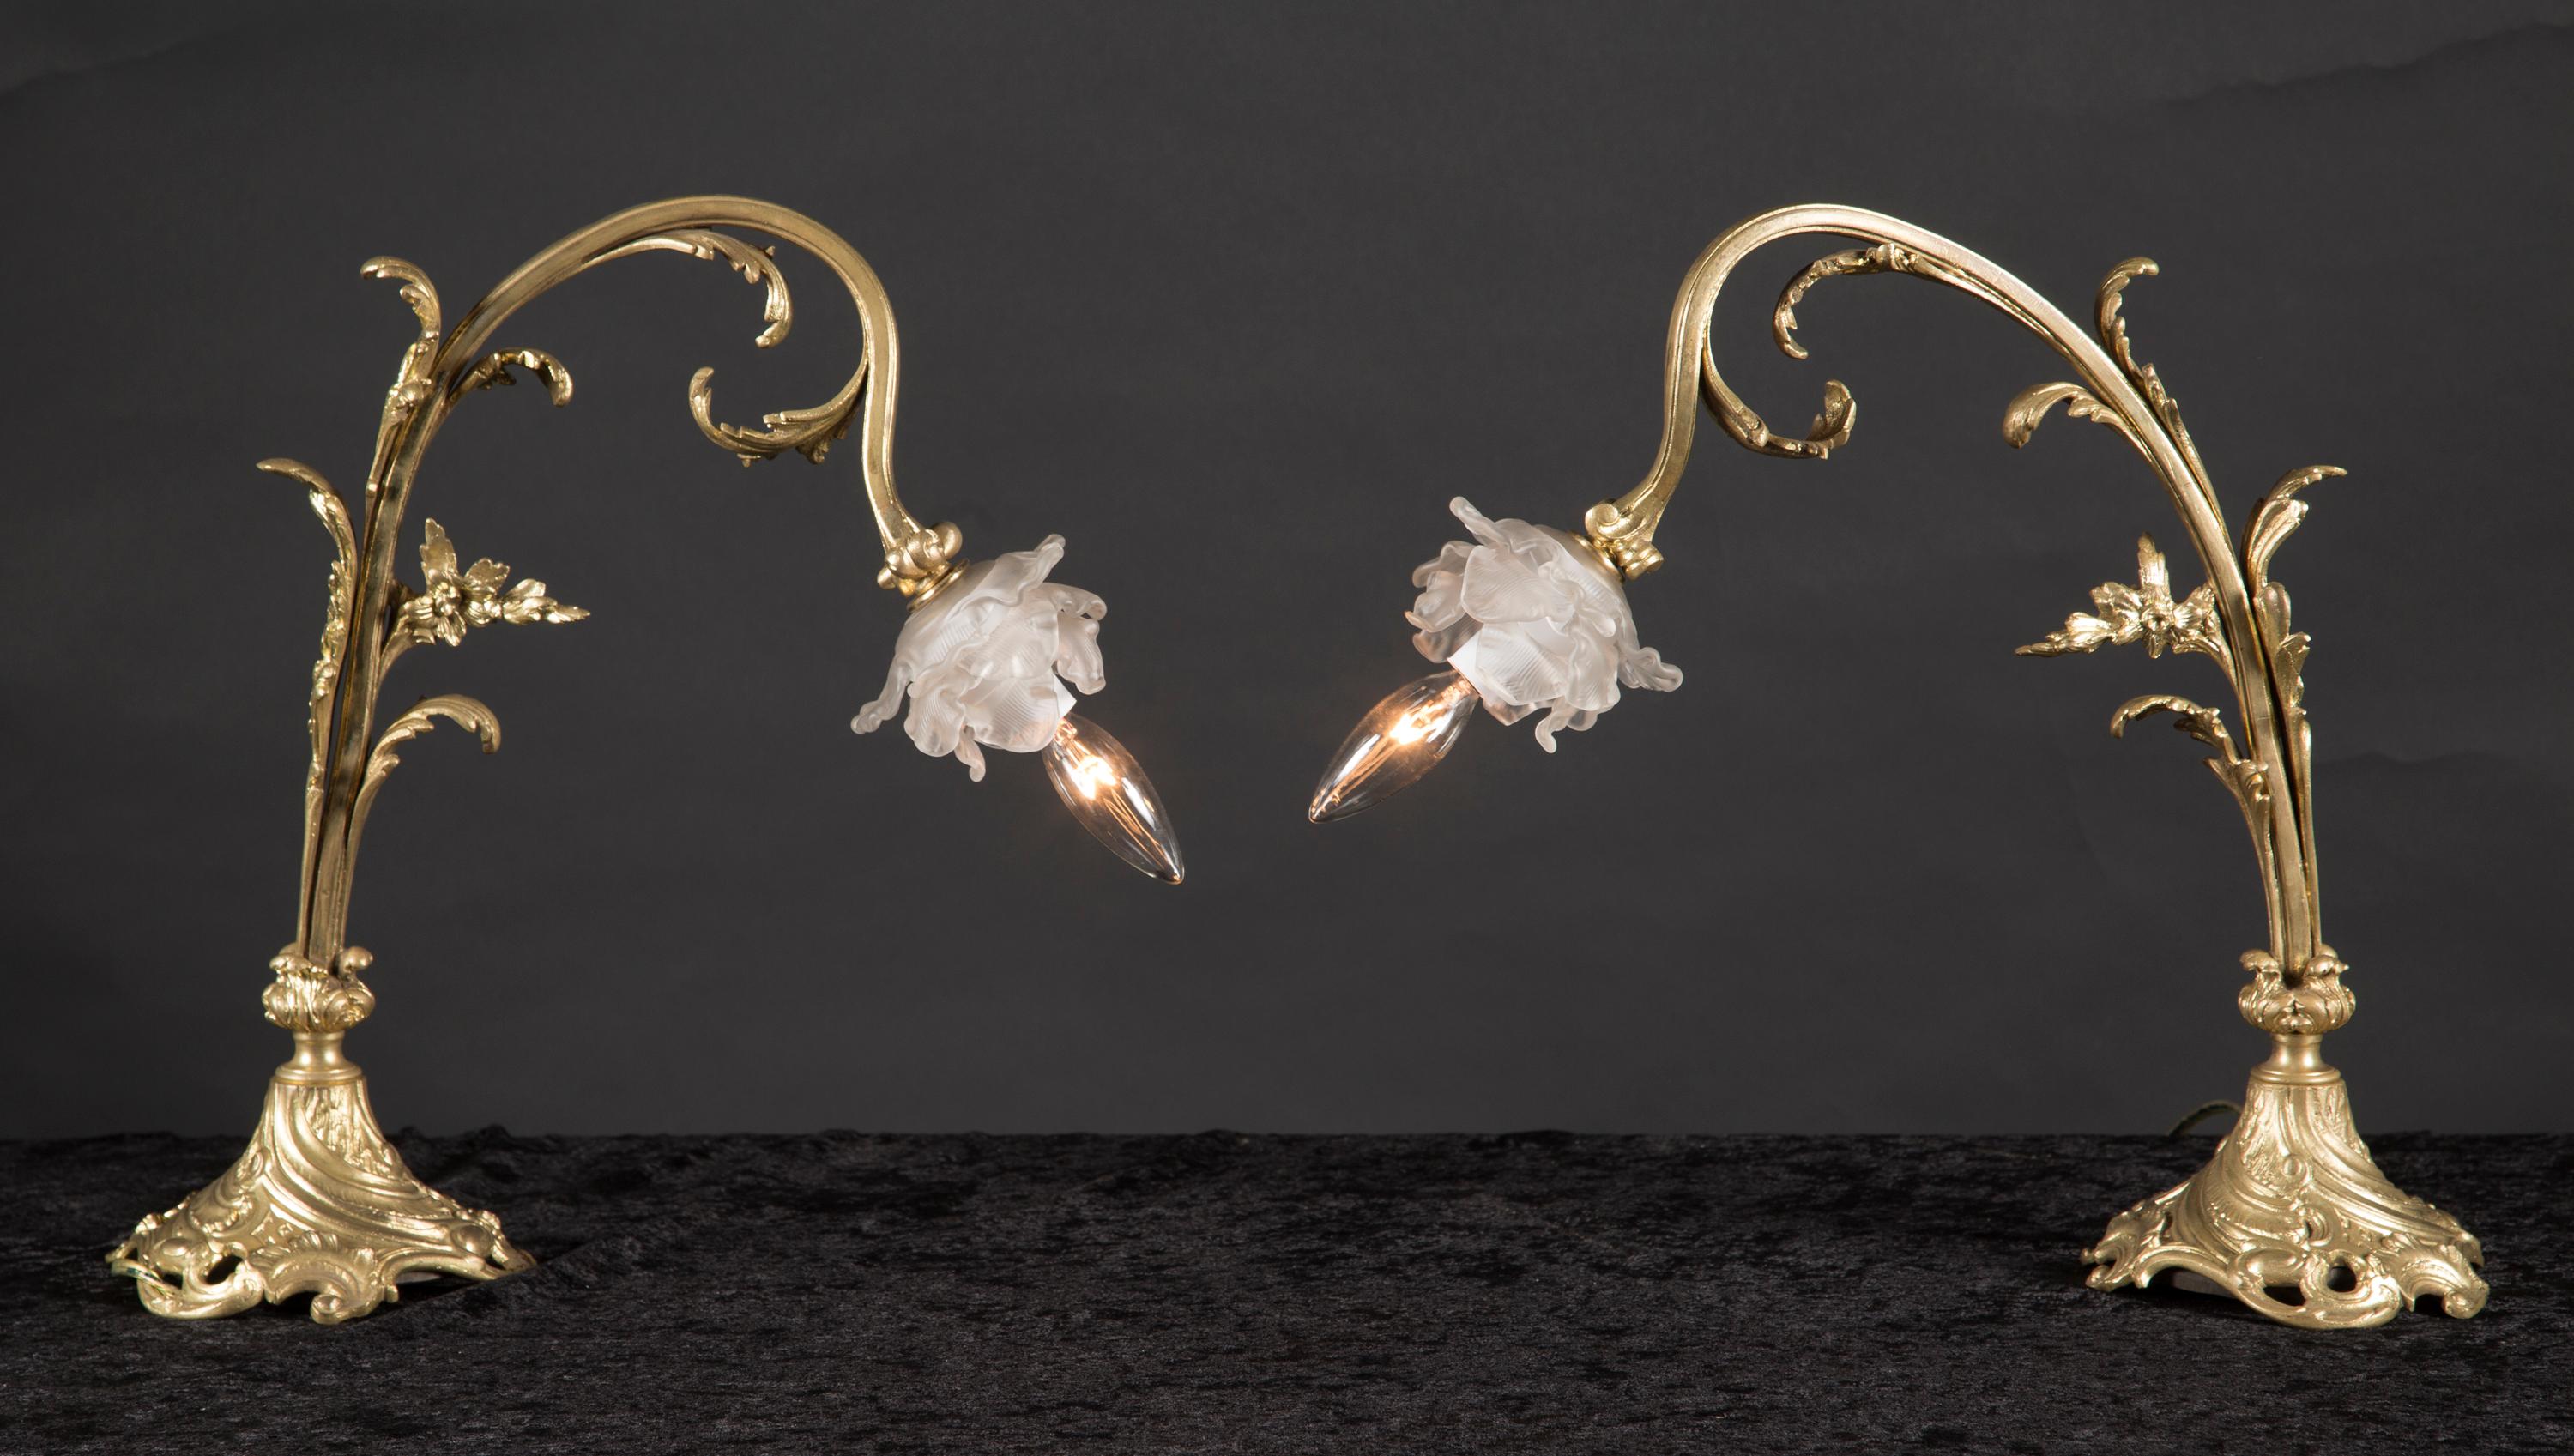 Pair of Art Nouveau Lamps with Delicate Satin Glass Roses, French, 19th Century In Good Condition For Sale In New Orleans, LA